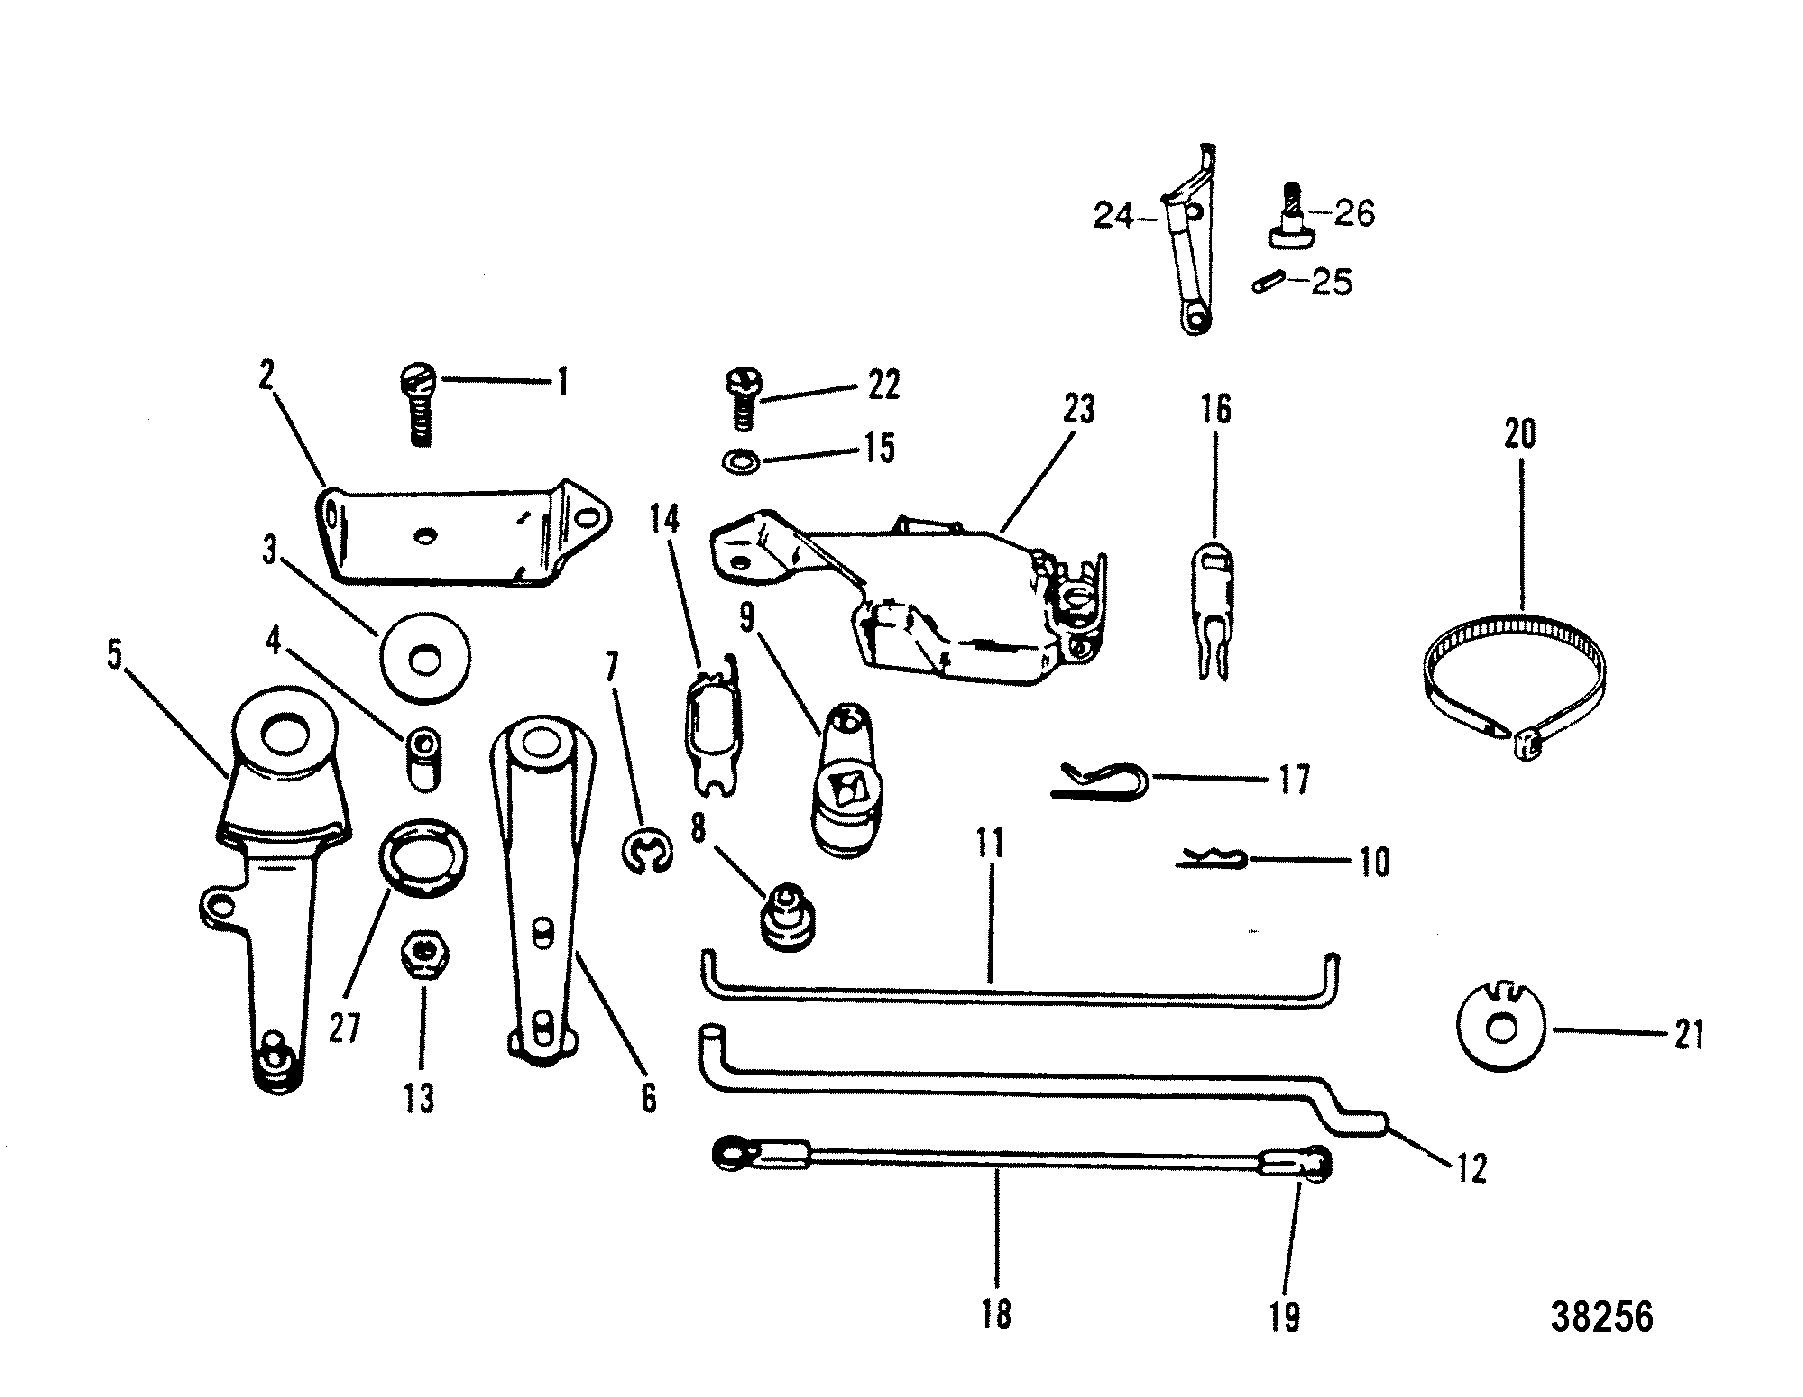 REMOTE CONTROL ATTACHING COMPONENTS